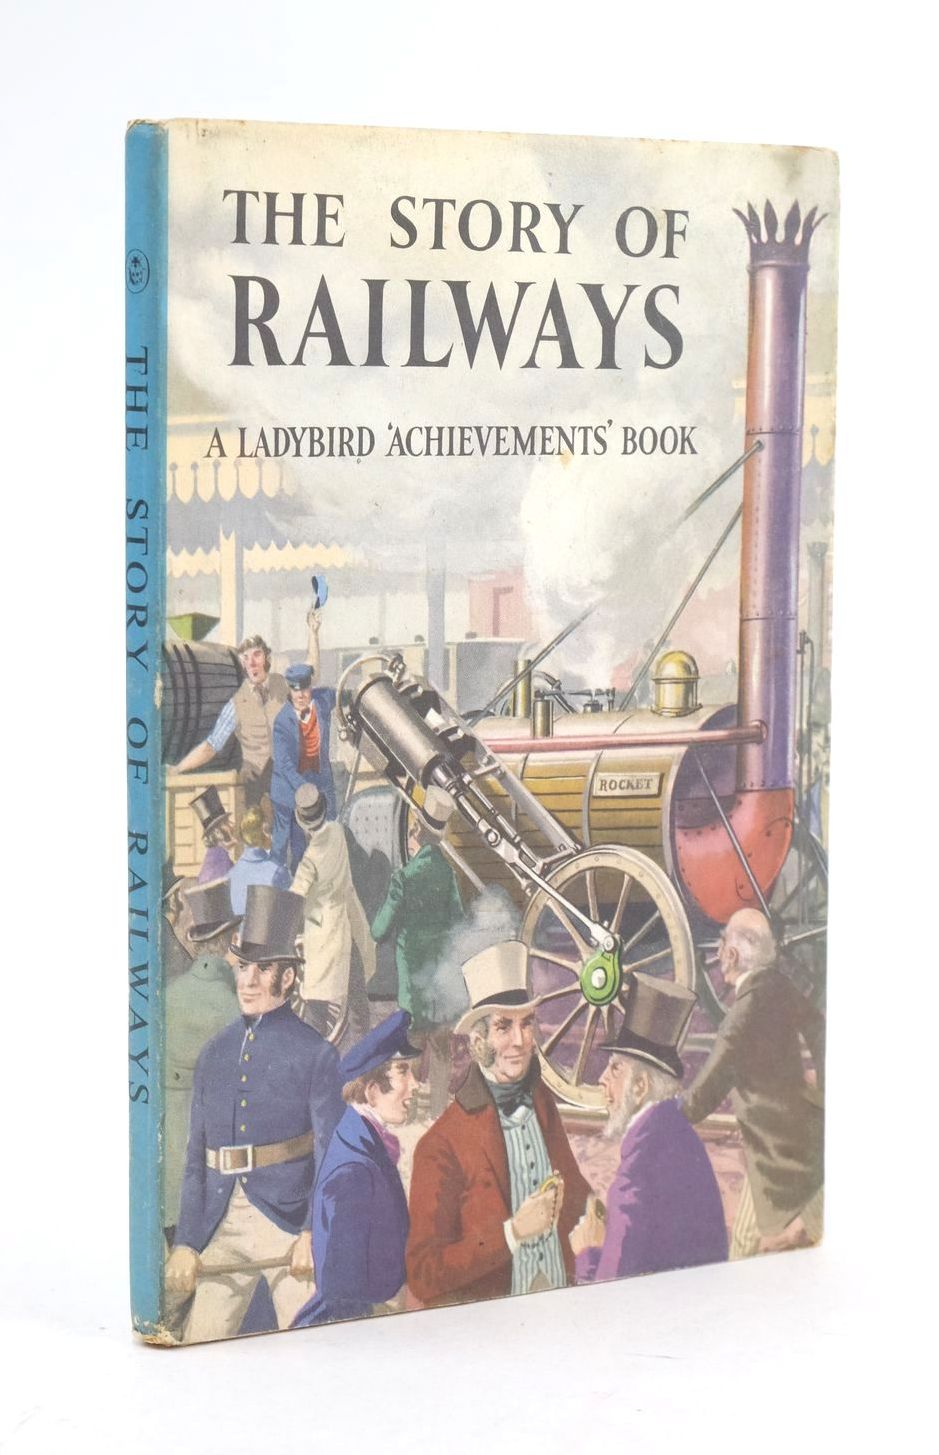 Photo of THE STORY OF RAILWAYS written by Bowood, Richard illustrated by Ayton, Robert published by Wills & Hepworth Ltd. (STOCK CODE: 1324668)  for sale by Stella & Rose's Books